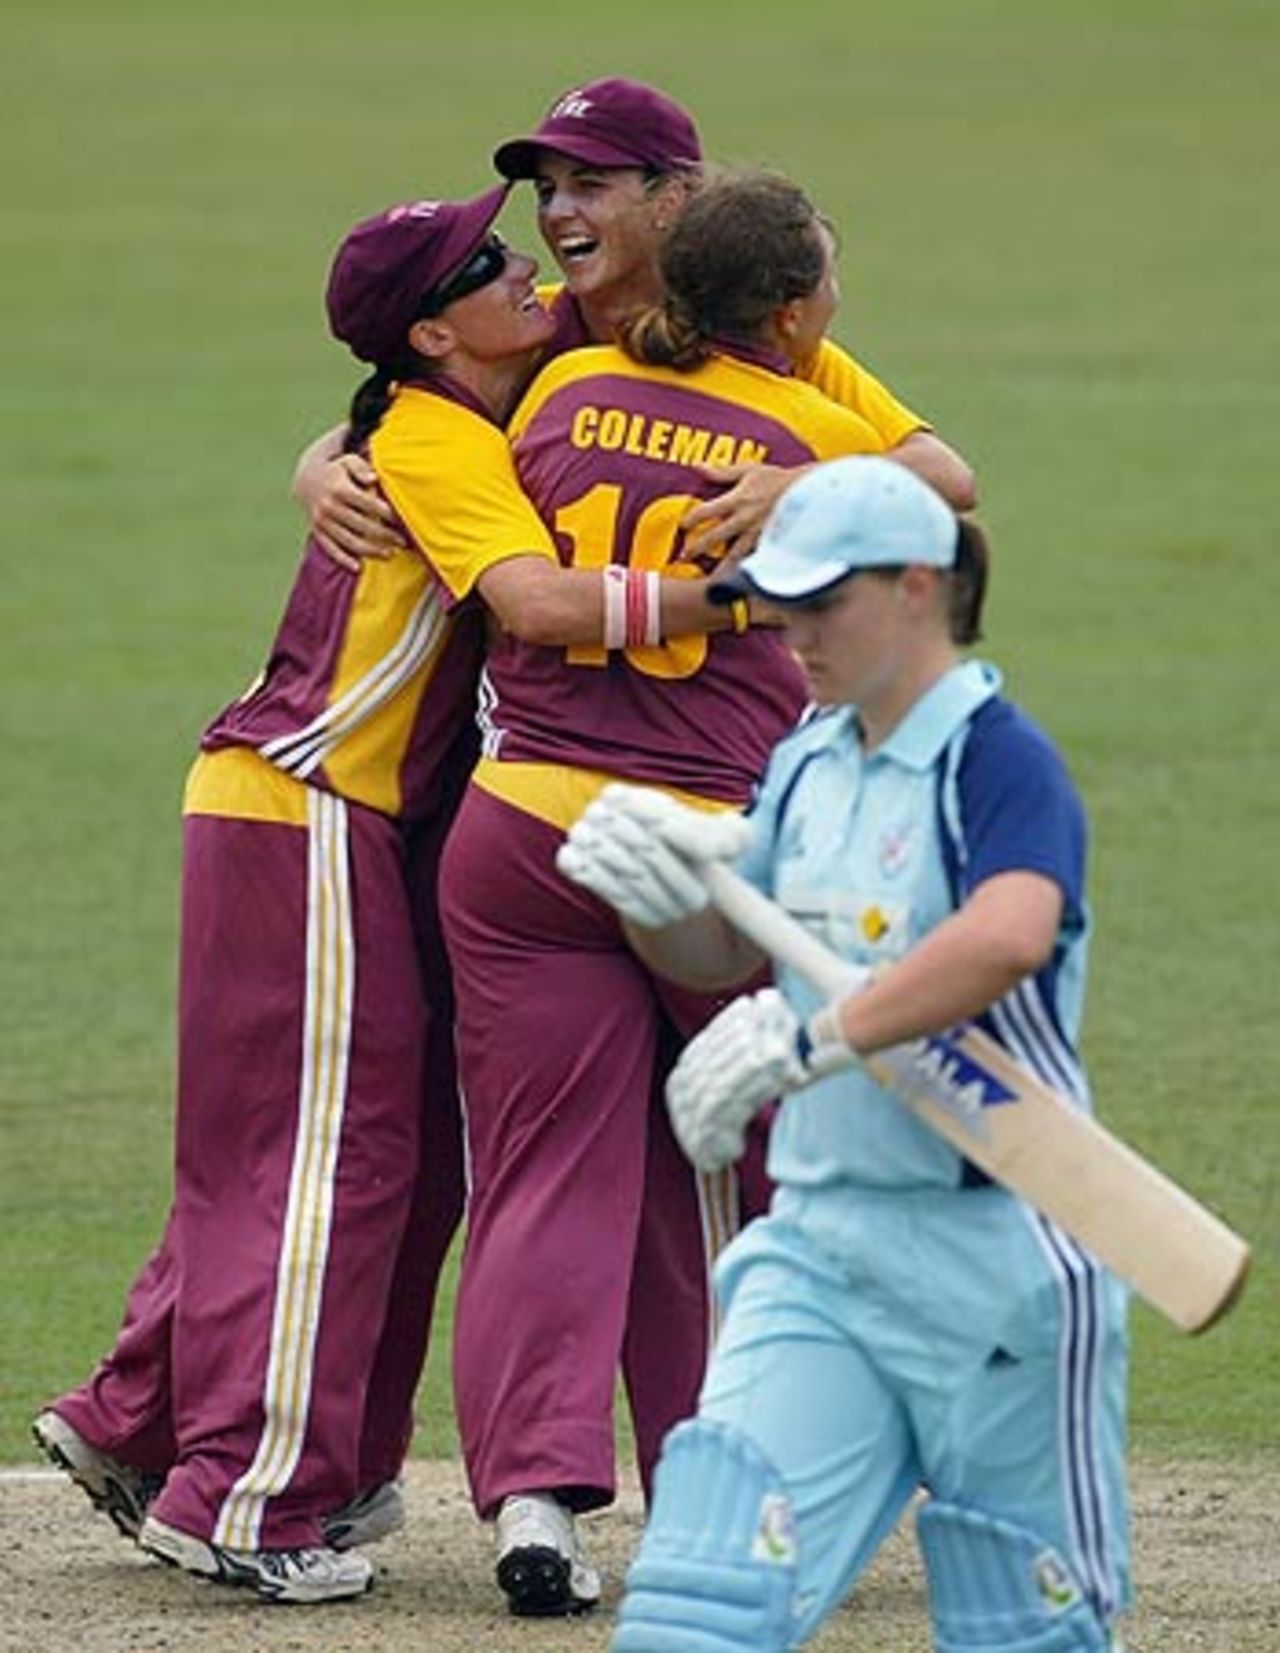 Queensland Fire cricketers celebrate the wicket of Sarah Aley, New South Wales Women v Queensland Women, 3rd Final, Women's National Cricket League, February 5, 2006